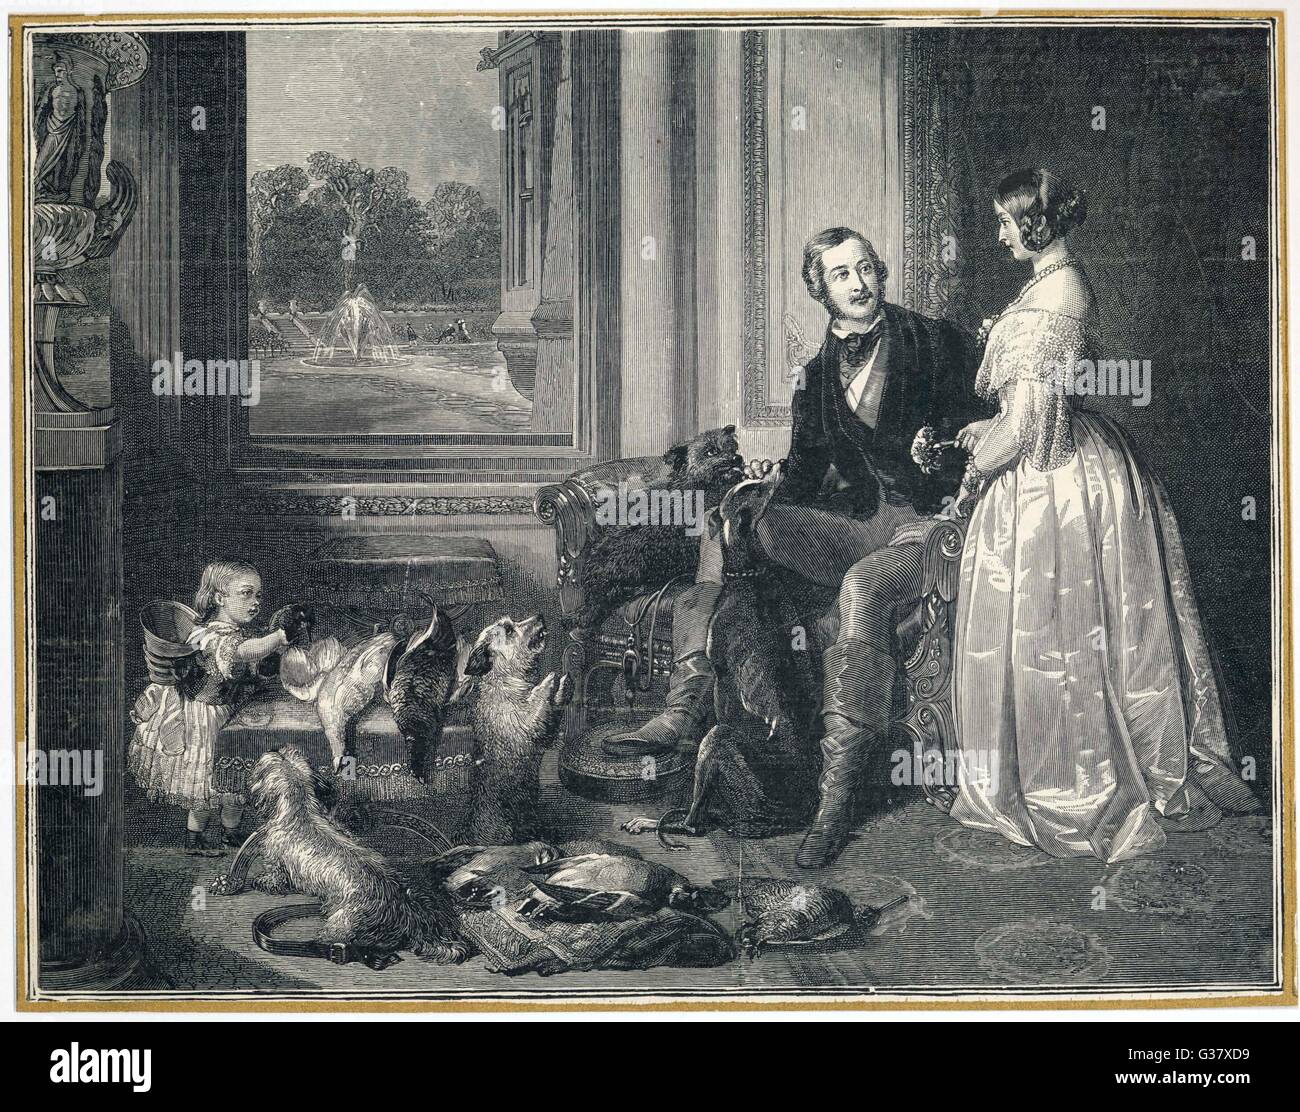 QUEEN VICTORIA BRITISH ROYALTY  At Windsor        Date: 1843 Stock Photo